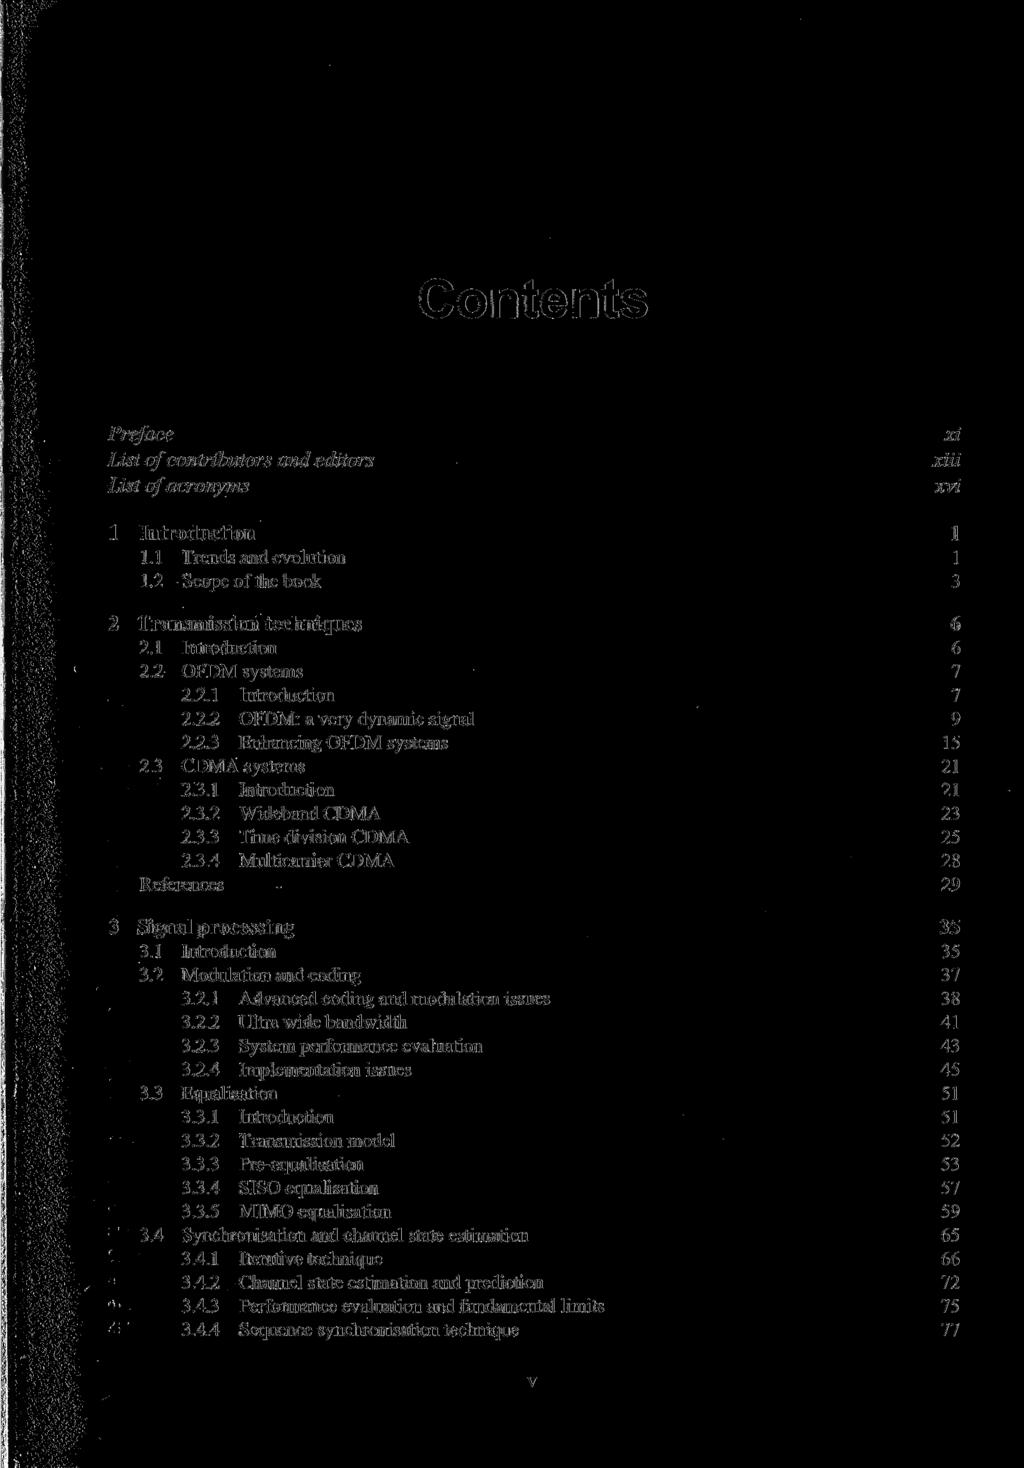 Contents Preface List of contributors and editors List of acronyms xi xiii xvi 1 Introduction 1 1.1 Trends and evolution 1 1.2 Scope of the book 3 2 Transmission techniques 6 2.1 Introduction 6 2.